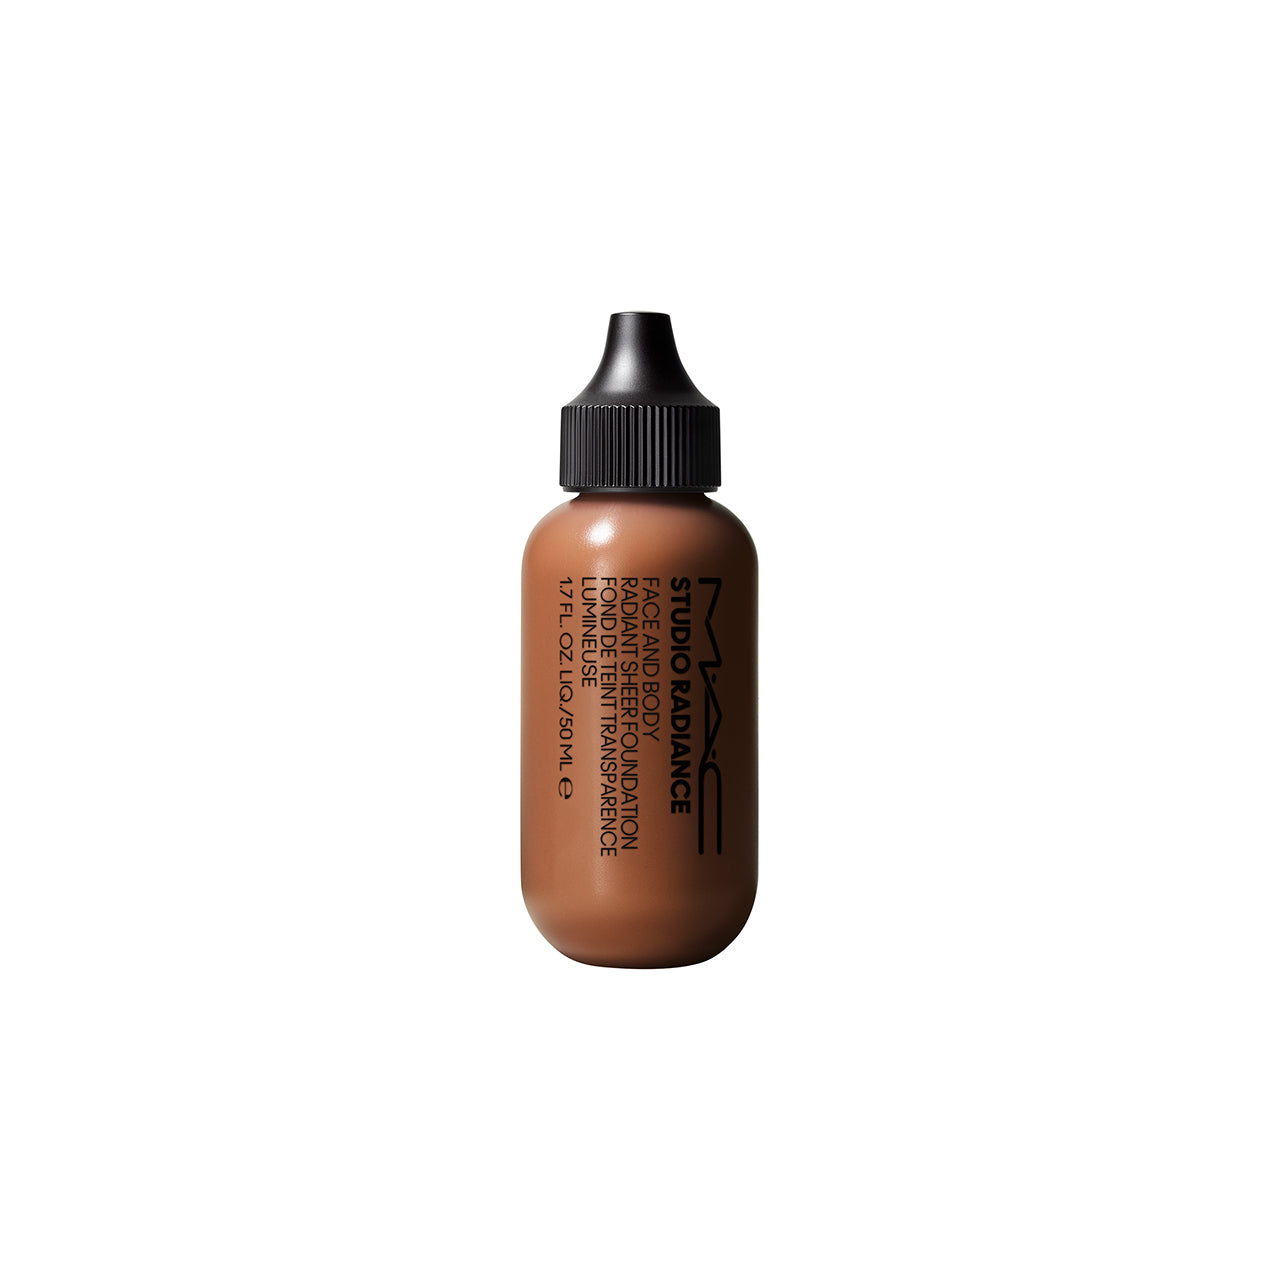 M·A·C Studio Radiance Face and Body Radiant Sheer Foundation